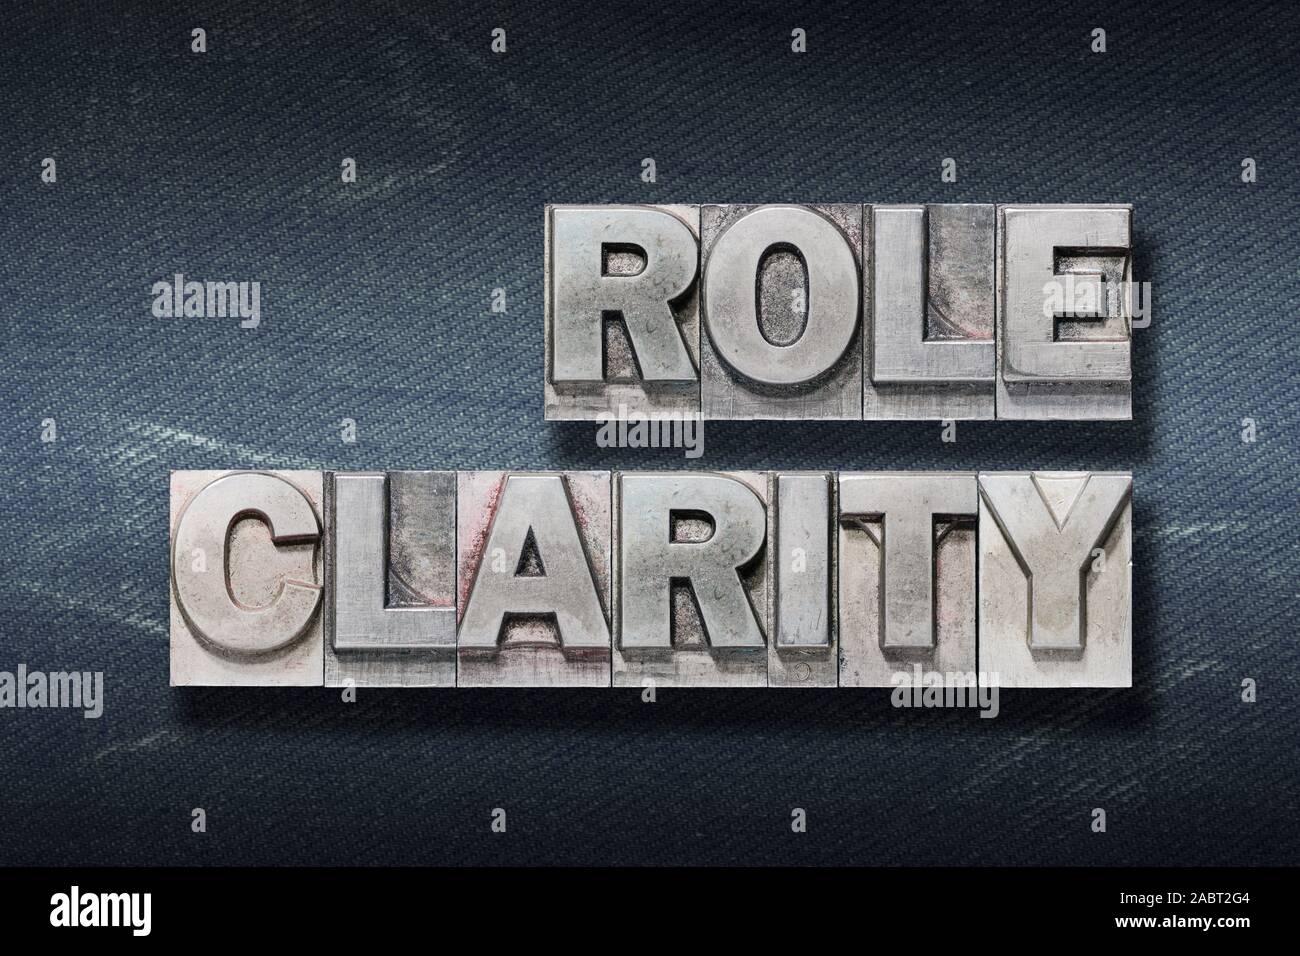 role clarity phrase made from metallic letterpress on dark jeans background Stock Photo